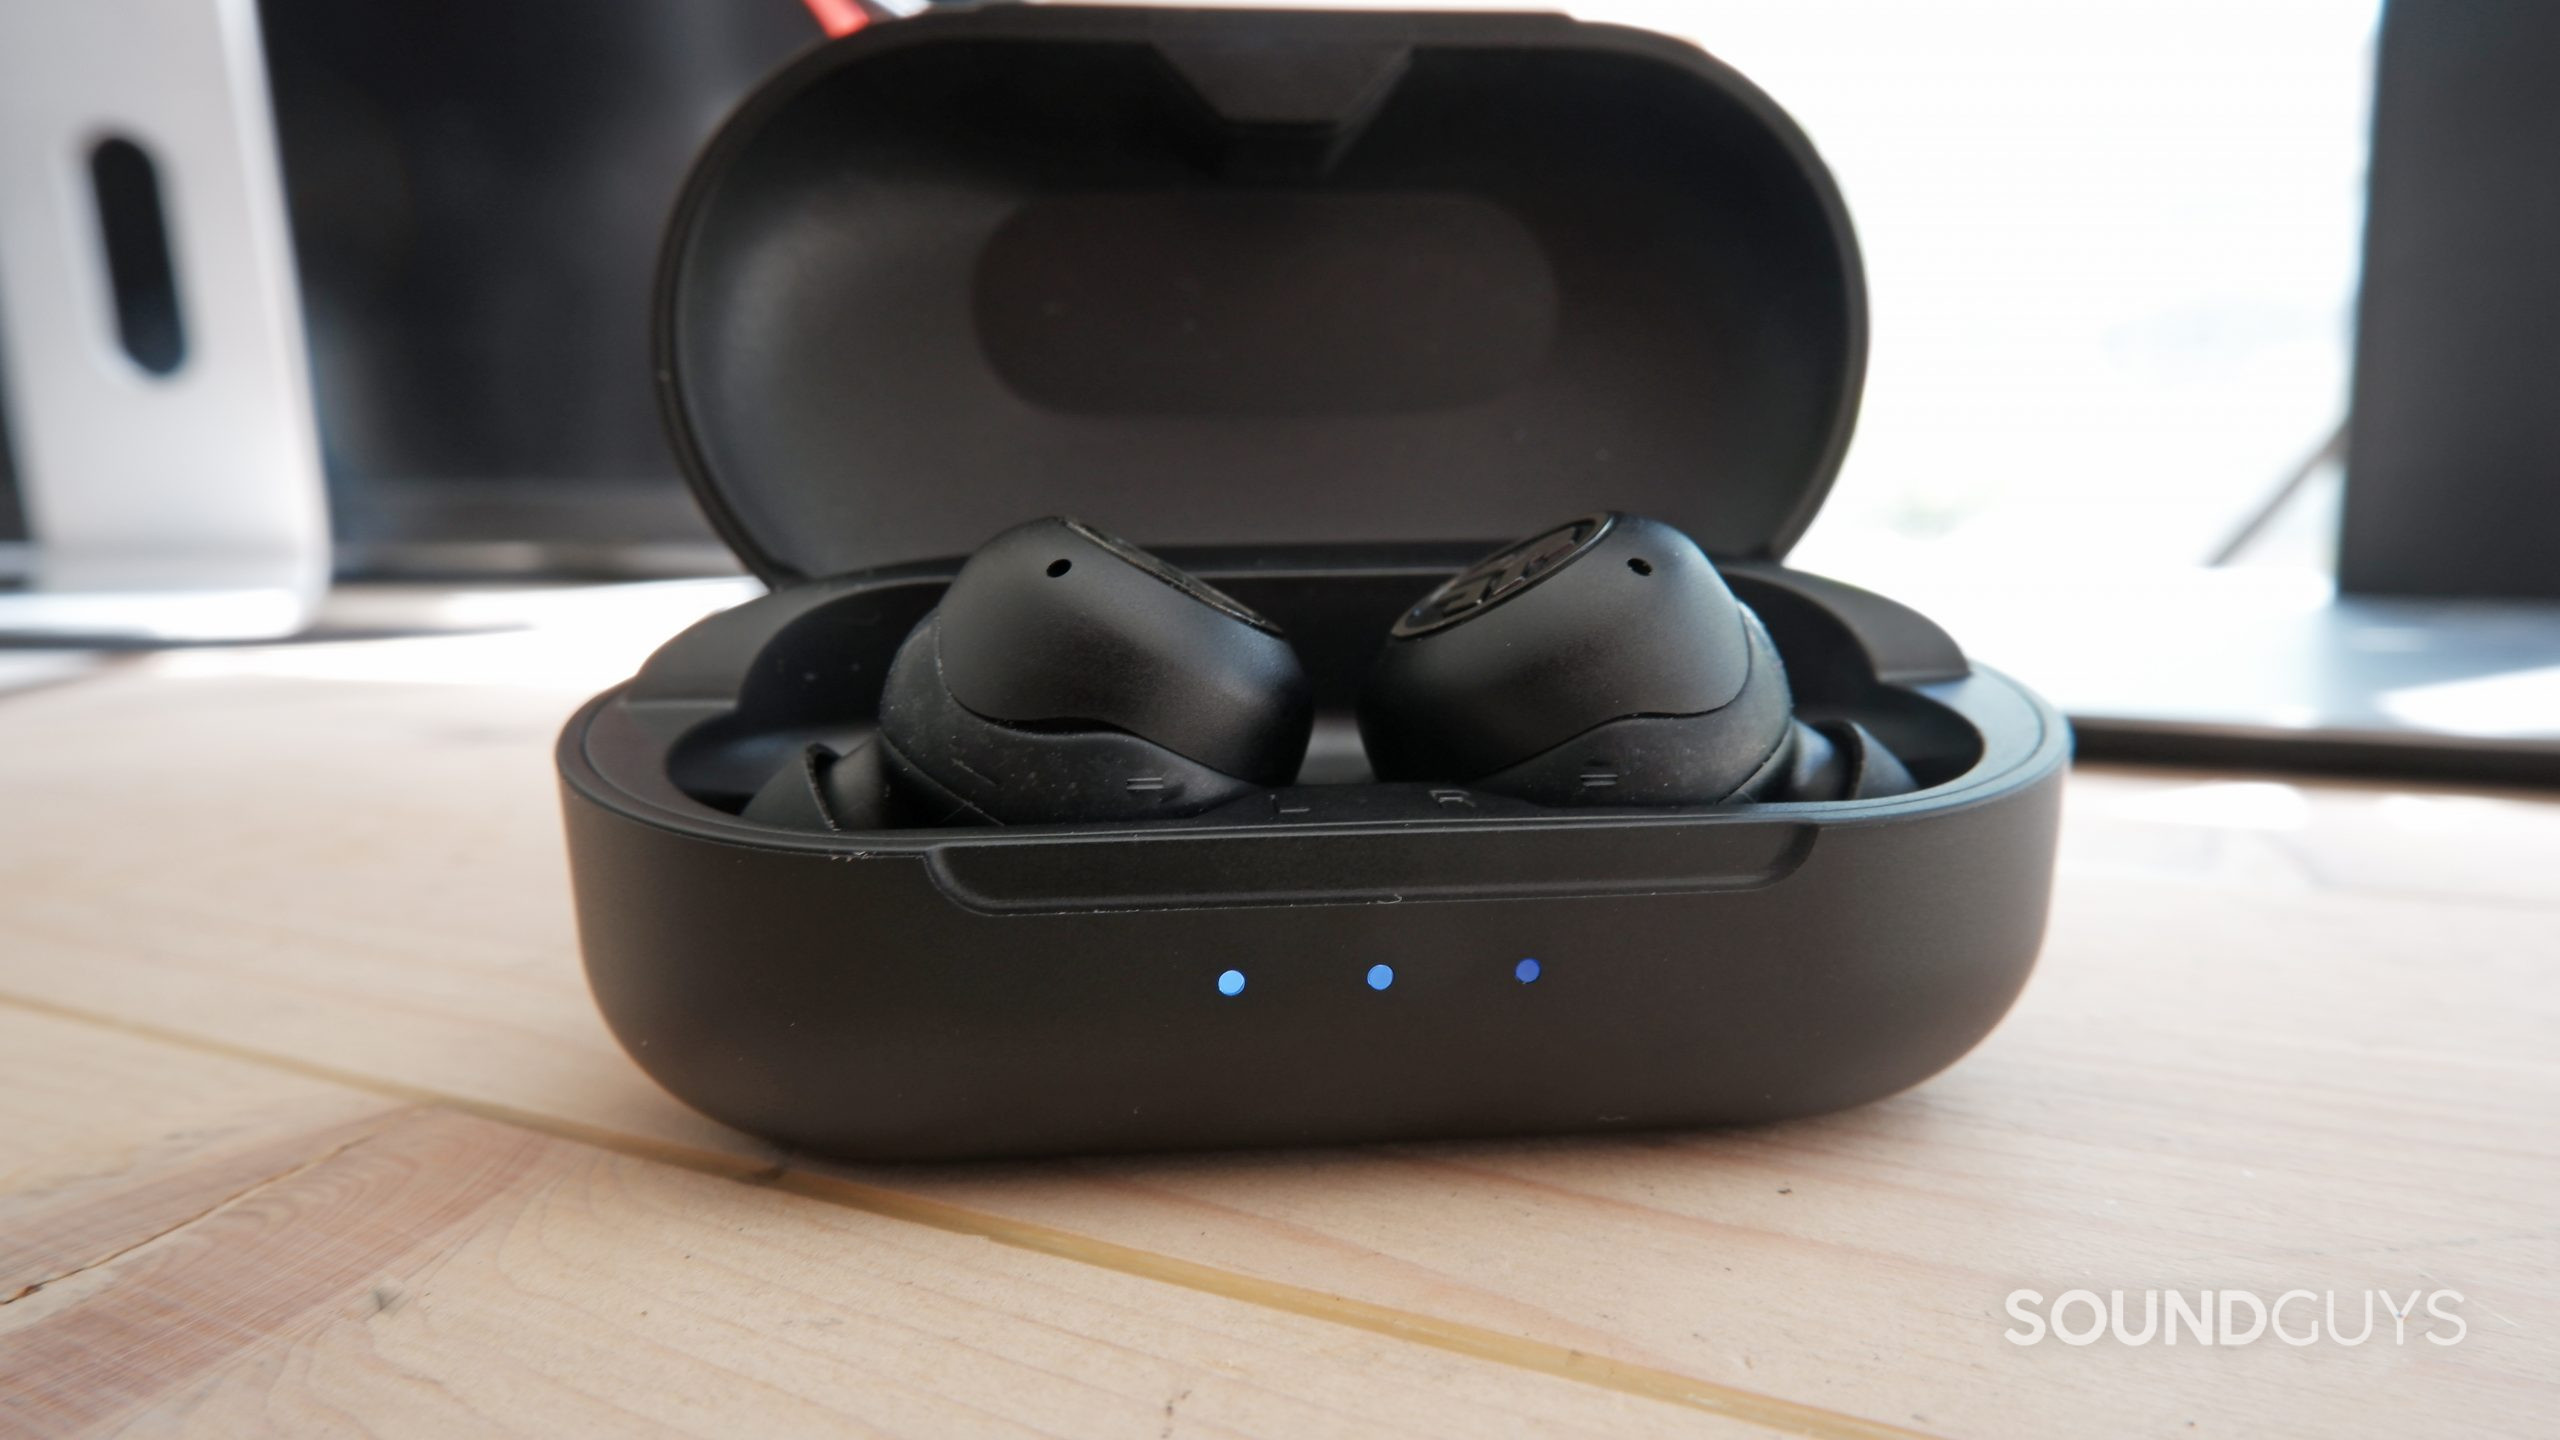 The JLab JBuds Air Pro case with battery indicator lights on.